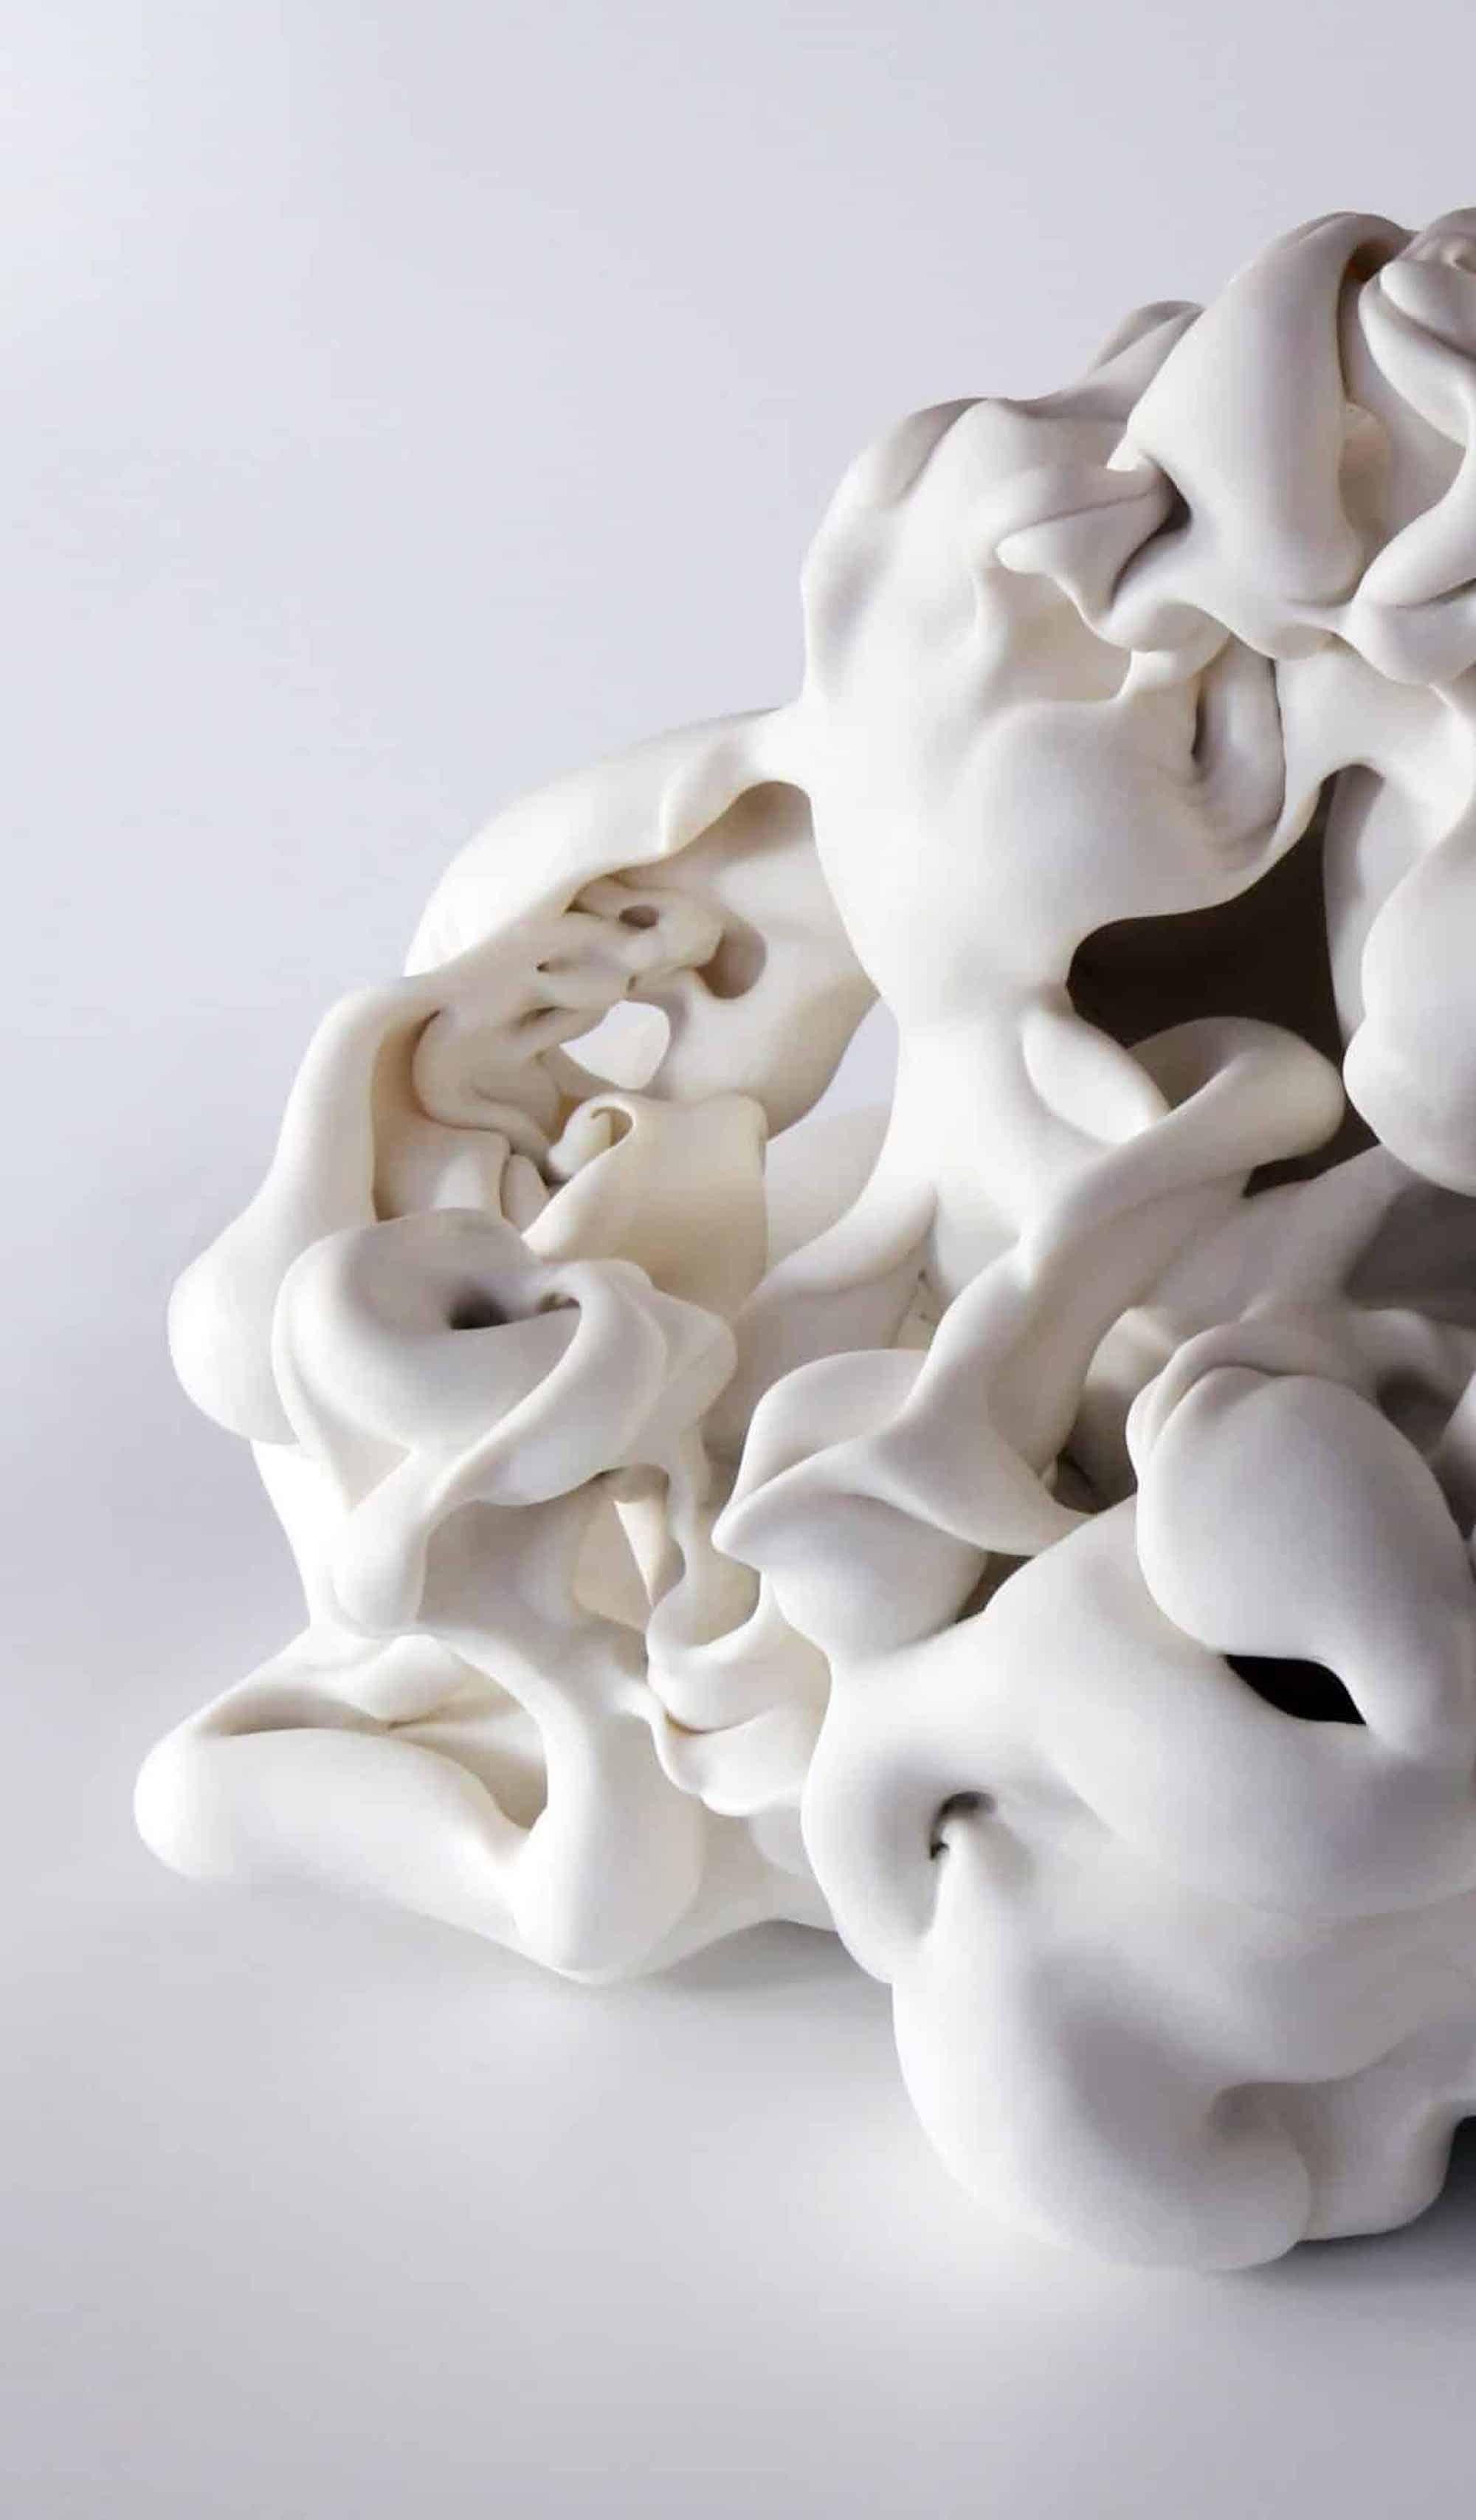 Untitled 4 by Sharon Brill - Abstract porcelain sculpture, organic forms, white For Sale 4